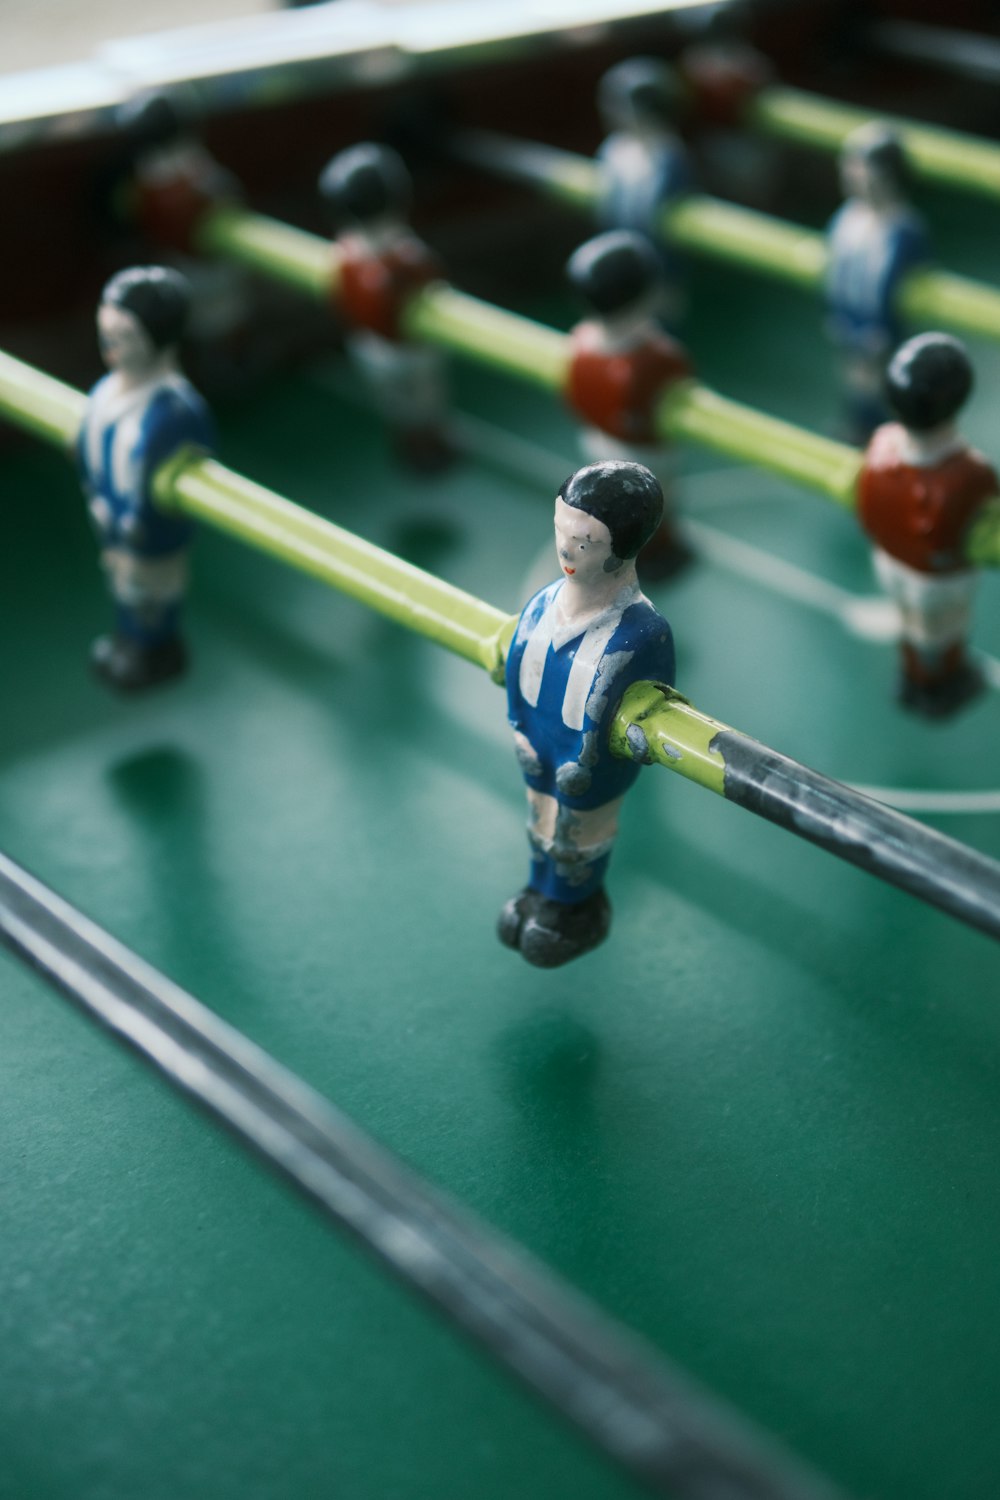 a close up of a foosball table with foosball players